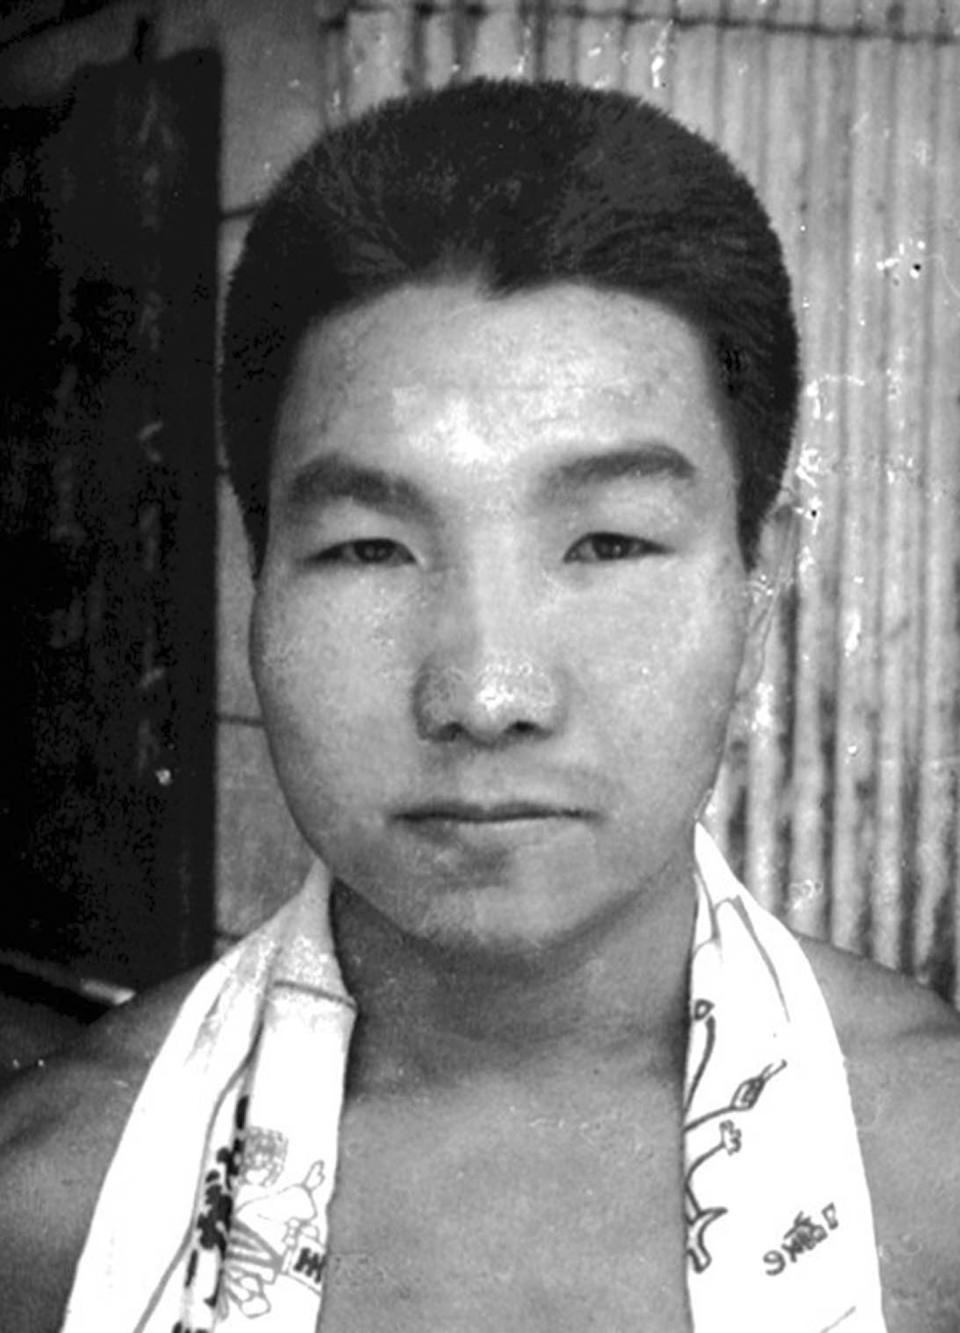 FILE - This undated file photo, shows Iwao Hakamada. Shizuoka District Court decided Thursday, March 27, 2014 to release the man on death row for more than 30 years in a high-profile murder case based on new DNA evidence. The court suspended the death sentence for 78-year-old Hakamada and ordered him released after 48 years behind bars. Guinness World Records lists him the longest-serving death row inmate. The court says DNA analysis obtained by his lawyers suggests investigators fabricated evidence. (AP Photo/Kyodo News, File) JAPAN OUT, CREDIT MANDATORY